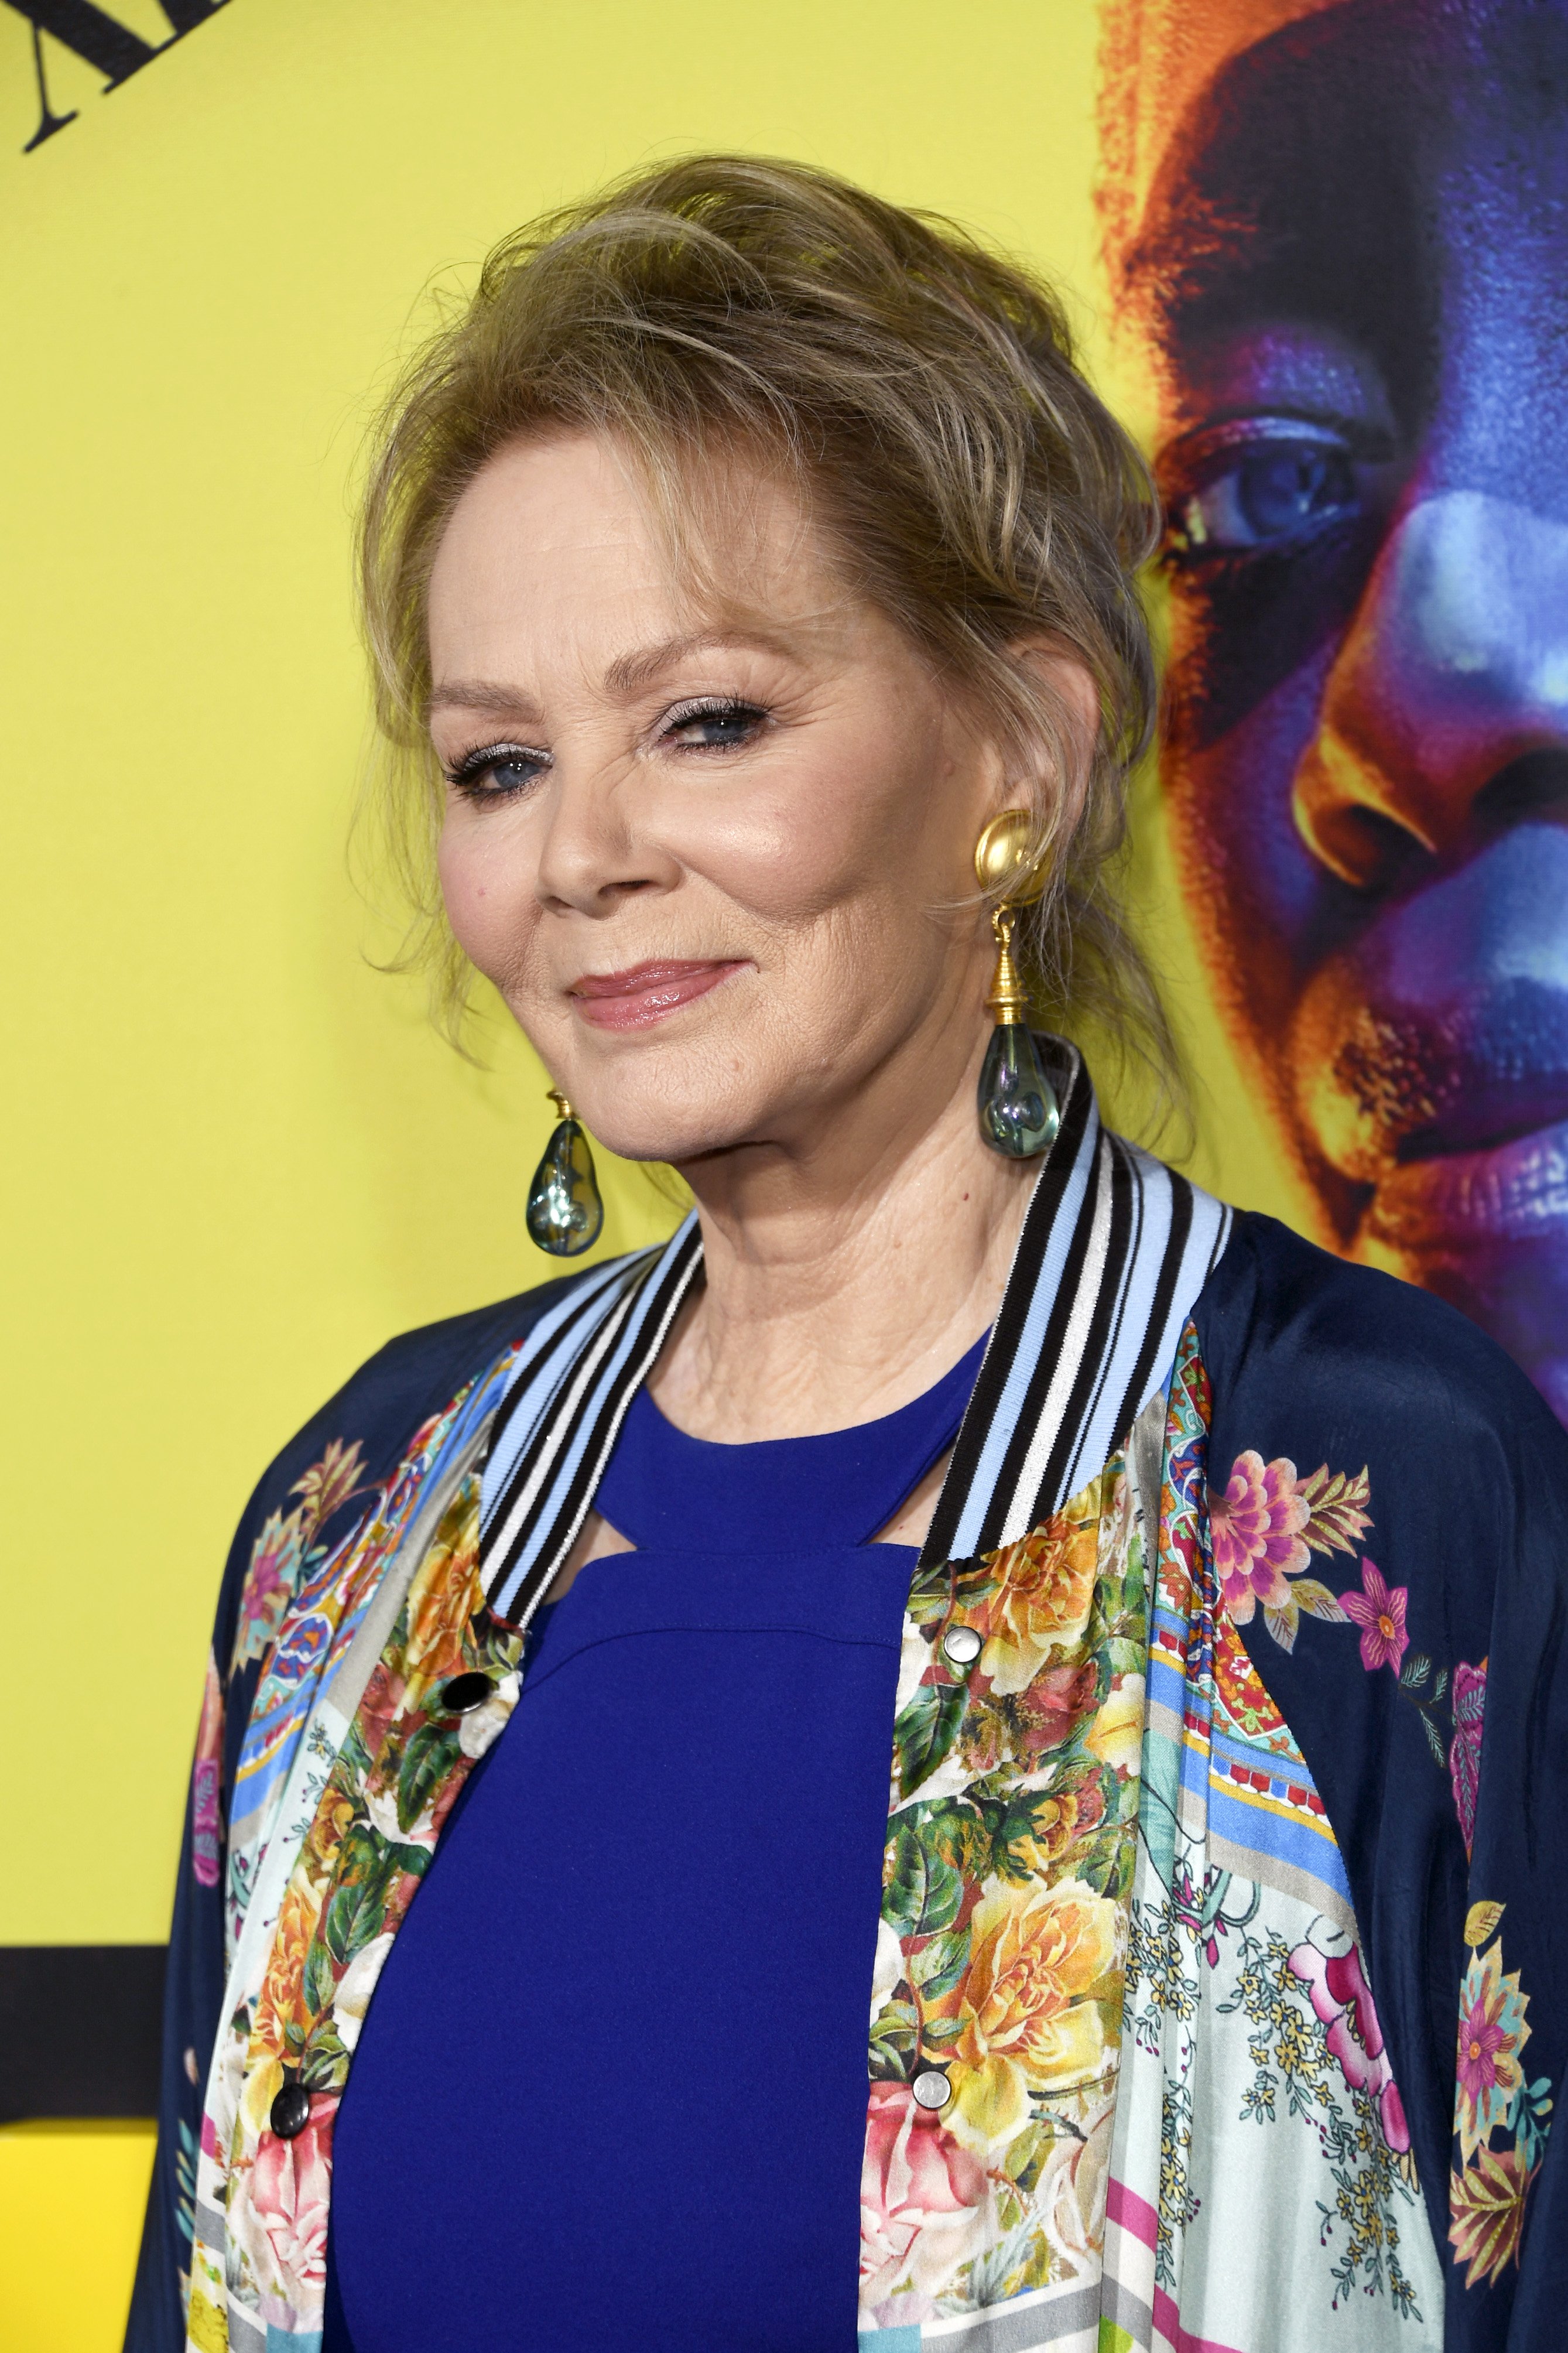 Jean Smart attends the premiere of HBO's "Watchmen" in 2019. | Source: Getty Images